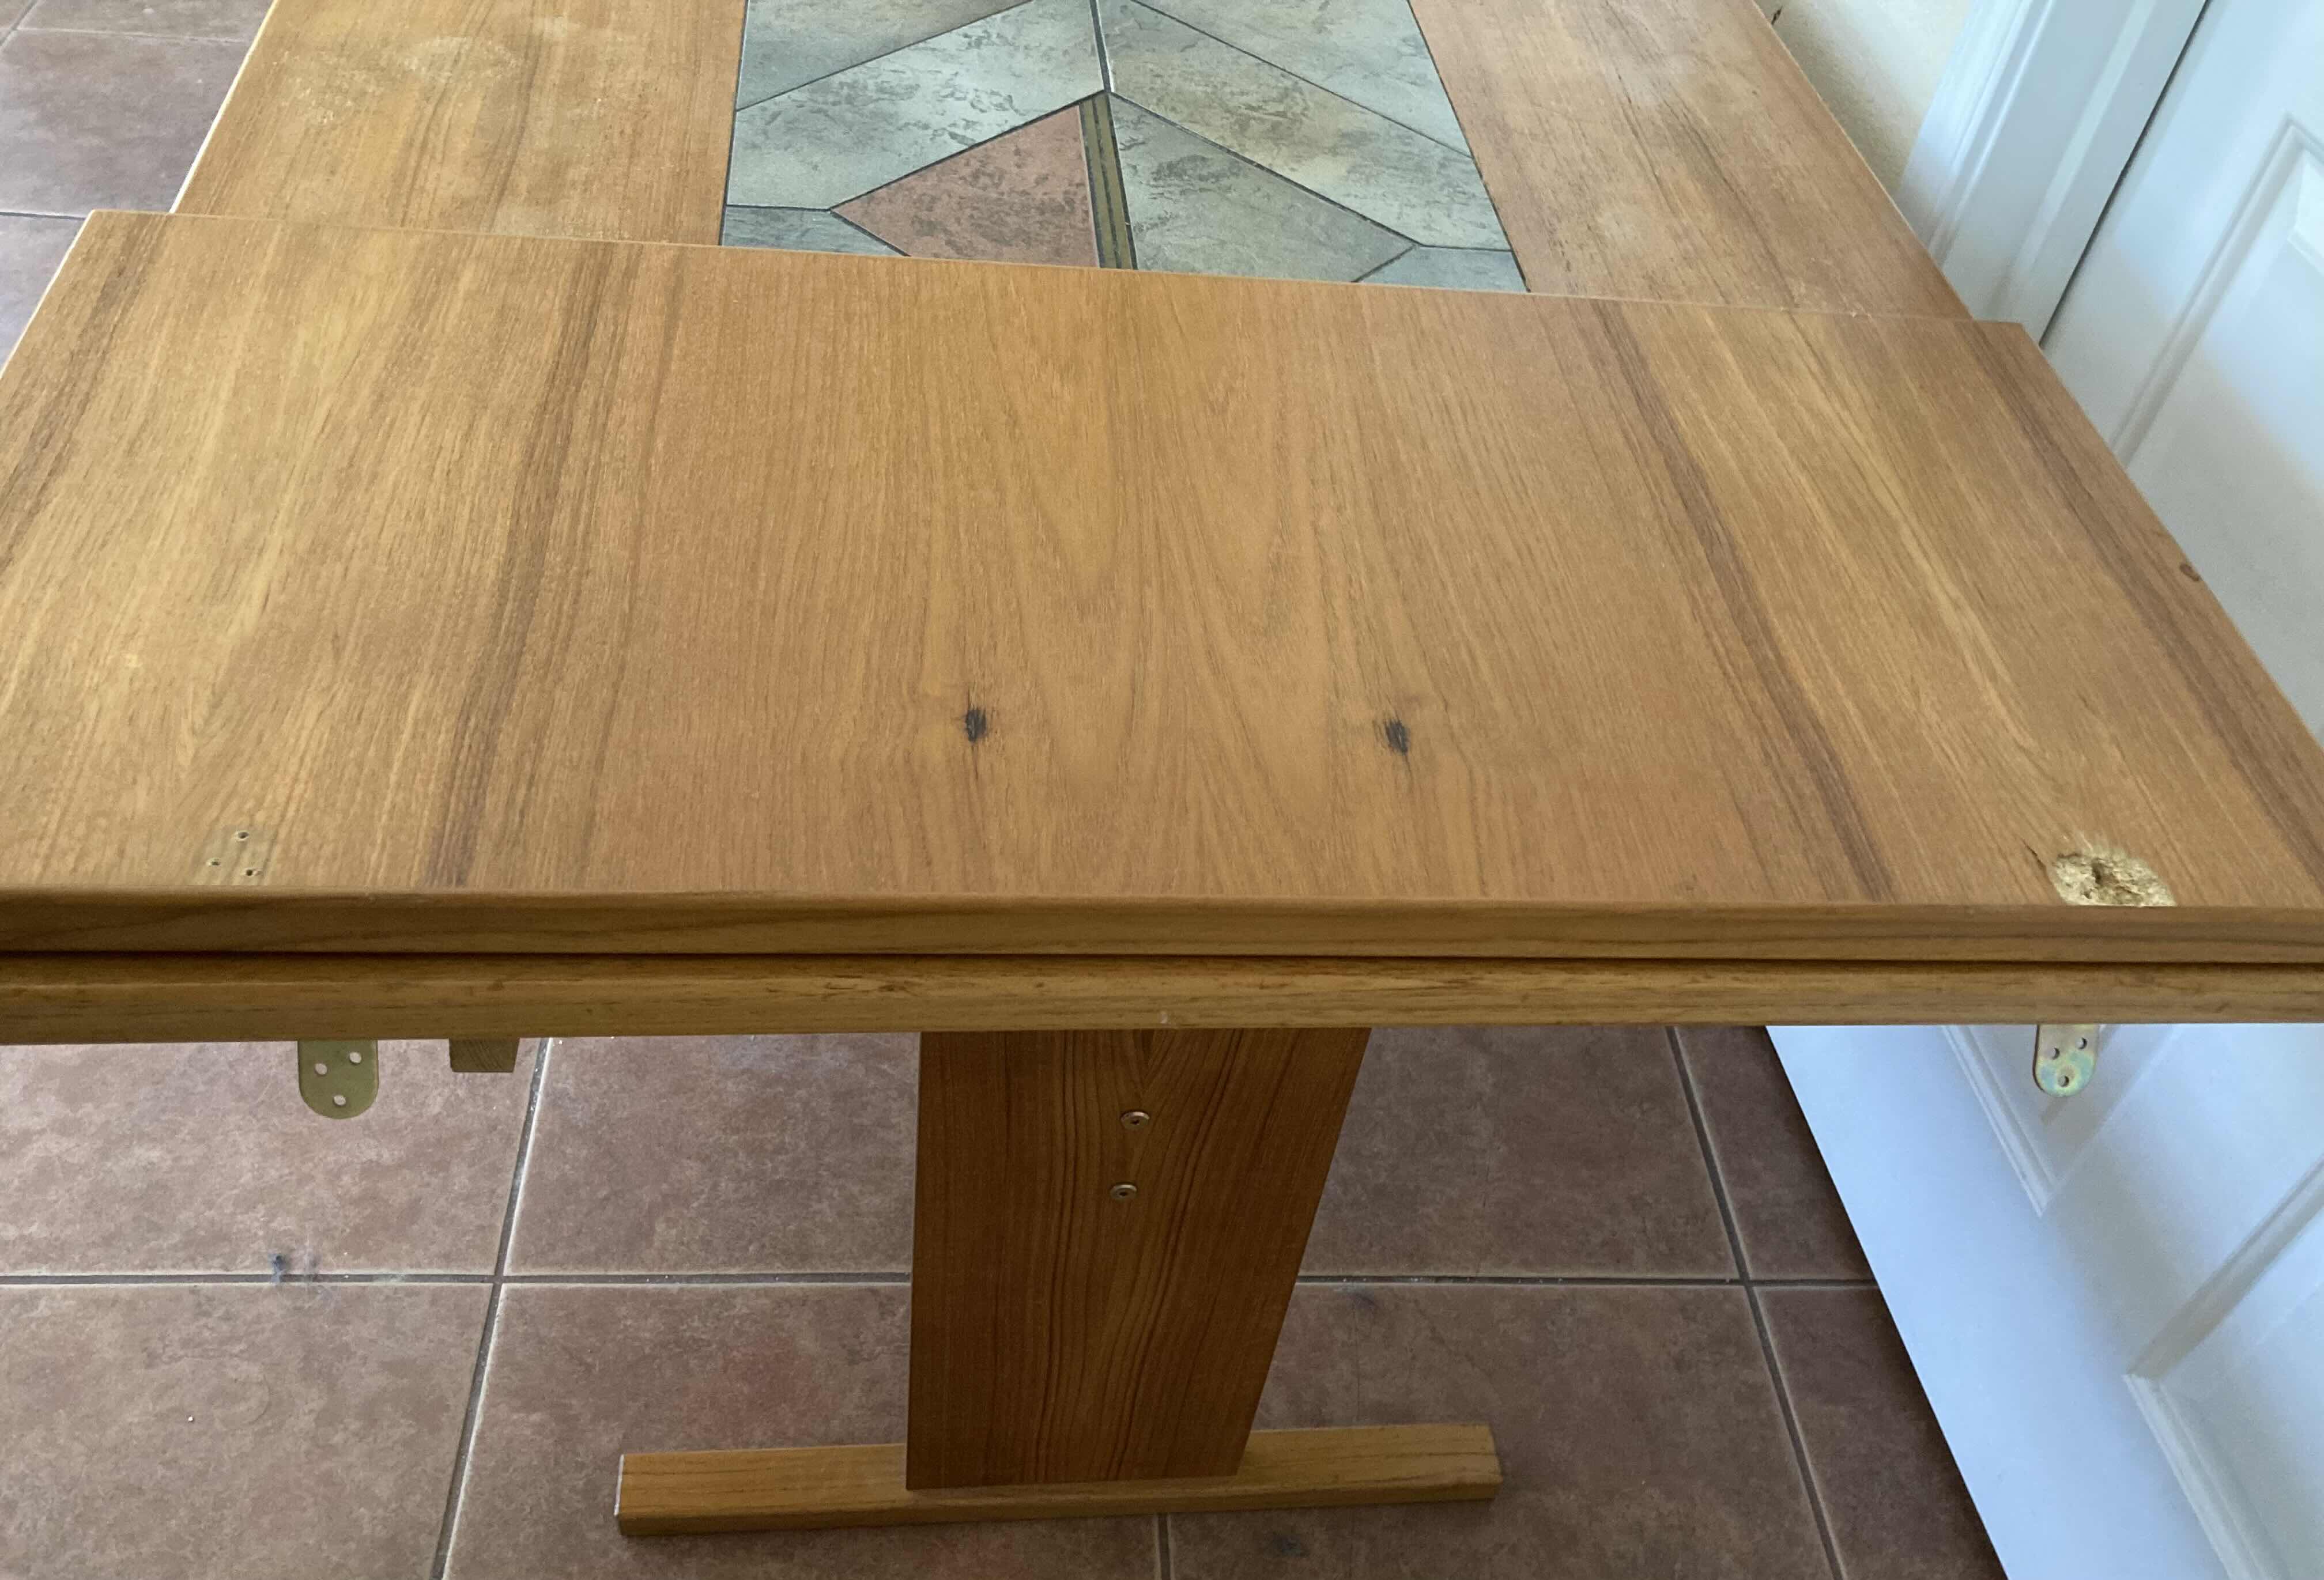 Photo 9 of SOUTHWESTERN STYLE WOOD FINISH DINING TABLE W TILE TOP INLAY 63”-79” X 35.5” H28.5”